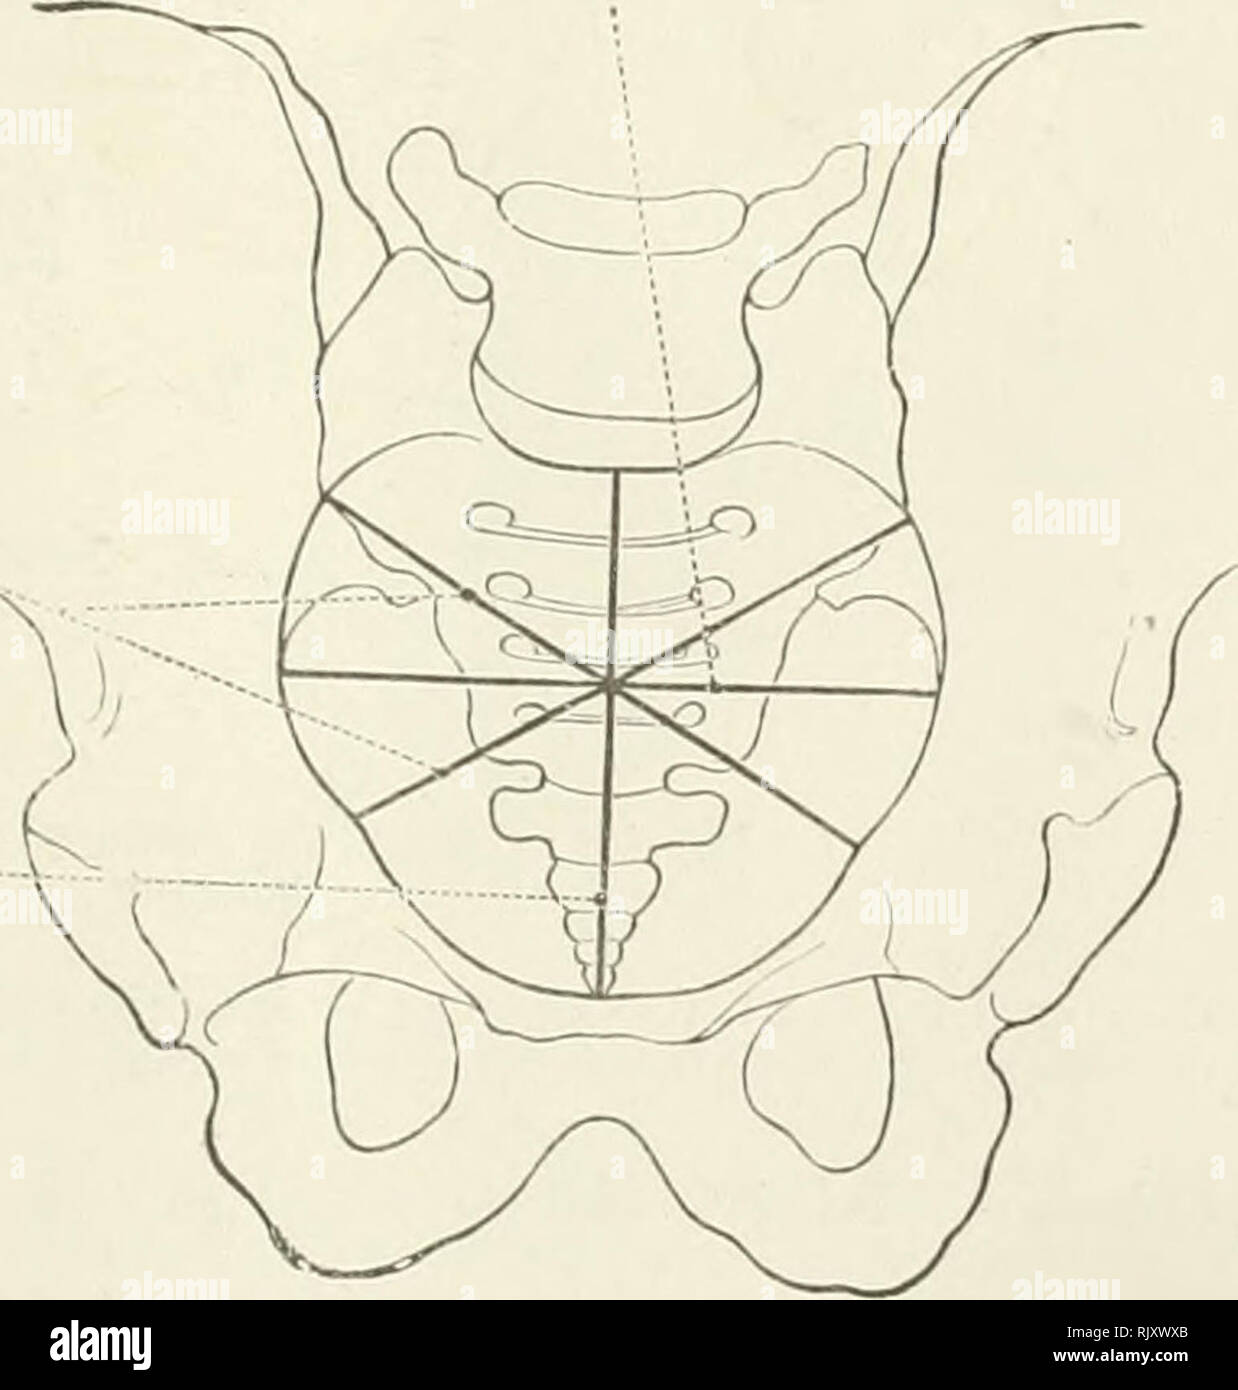 . An atlas of human anatomy for students and physicians. Anatomy. — Median-sagittal or antero-postenor diameter of the pelvic cavity Axis of the pelvic canal Axis pelvis Median-sagittal or antero-posterior diameter of the pelvic outlet Horizontal plane Fig. 309.—The Median-Sagittal or Anteroposterior Diameters of the True Pelvis. Transverse diameter Diameter transversa Oblique diameter Diameter obliqua'&quot;&quot;. Antero-posterior diameter, or (T true conjugate - J Conjugata (vera). Fig. 310.—The Diameters of the Pelvic Inlet (Apertura Pelvis Superior). The Principal Diameters of the True  Stock Photo